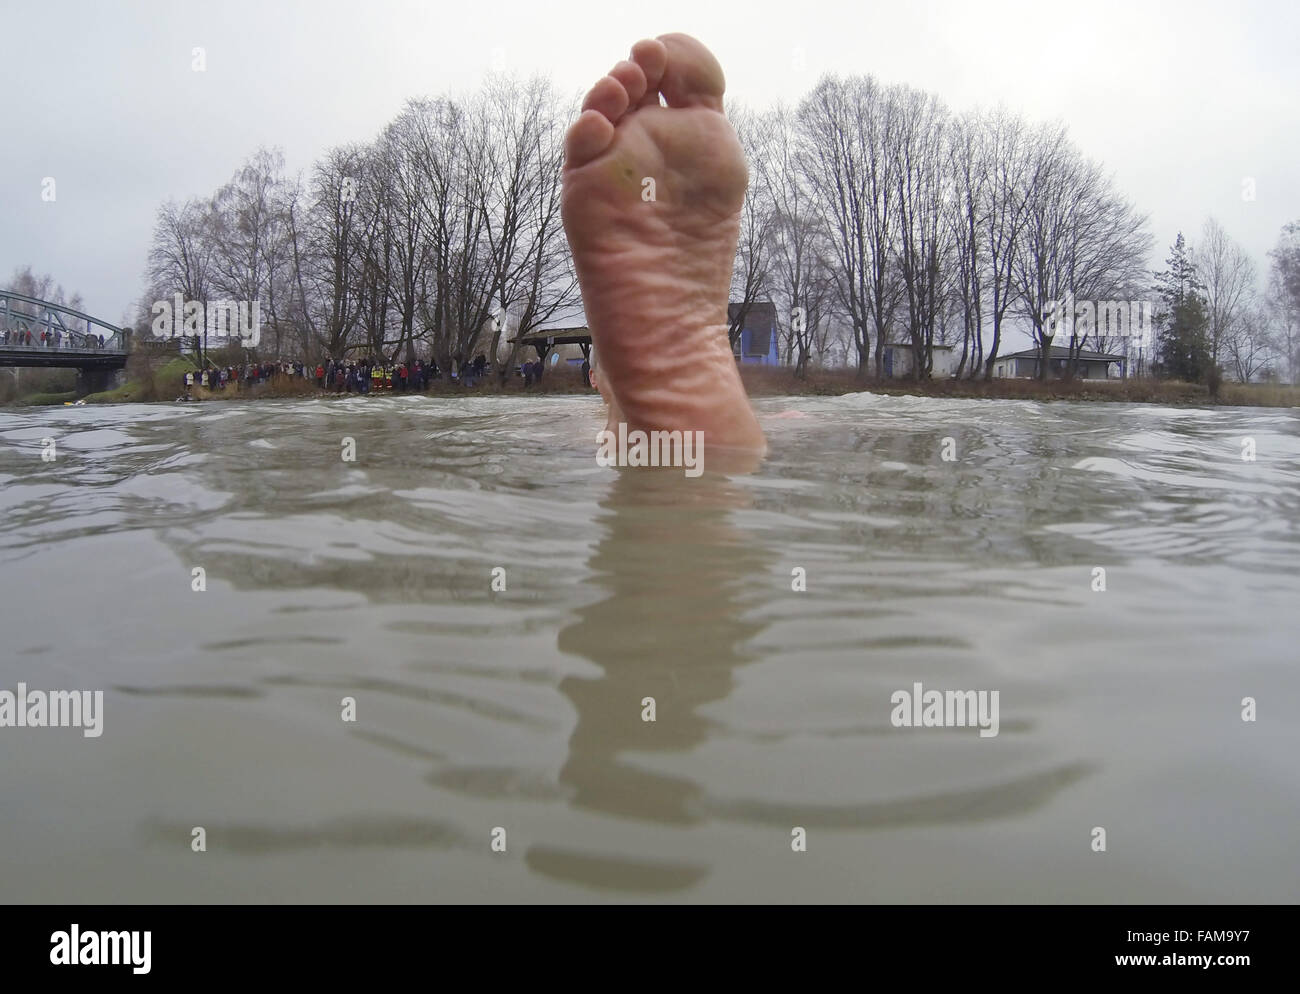 Seelze, Germany. 01st Jan, 2016. A foot of a swimmer taking part in the New Year swimming event held by the Sportgemeinschaft Letter von 1905 e.V. sports club in the Hanover-Linden branch canal in Seelze, Germany, 01 January 2016. Dozens of swimmers plunged into the cold water that measured around six degrees Celsius. Photo: JULIAN STRATENSCHULTE/dpa/Alamy Live News Stock Photo